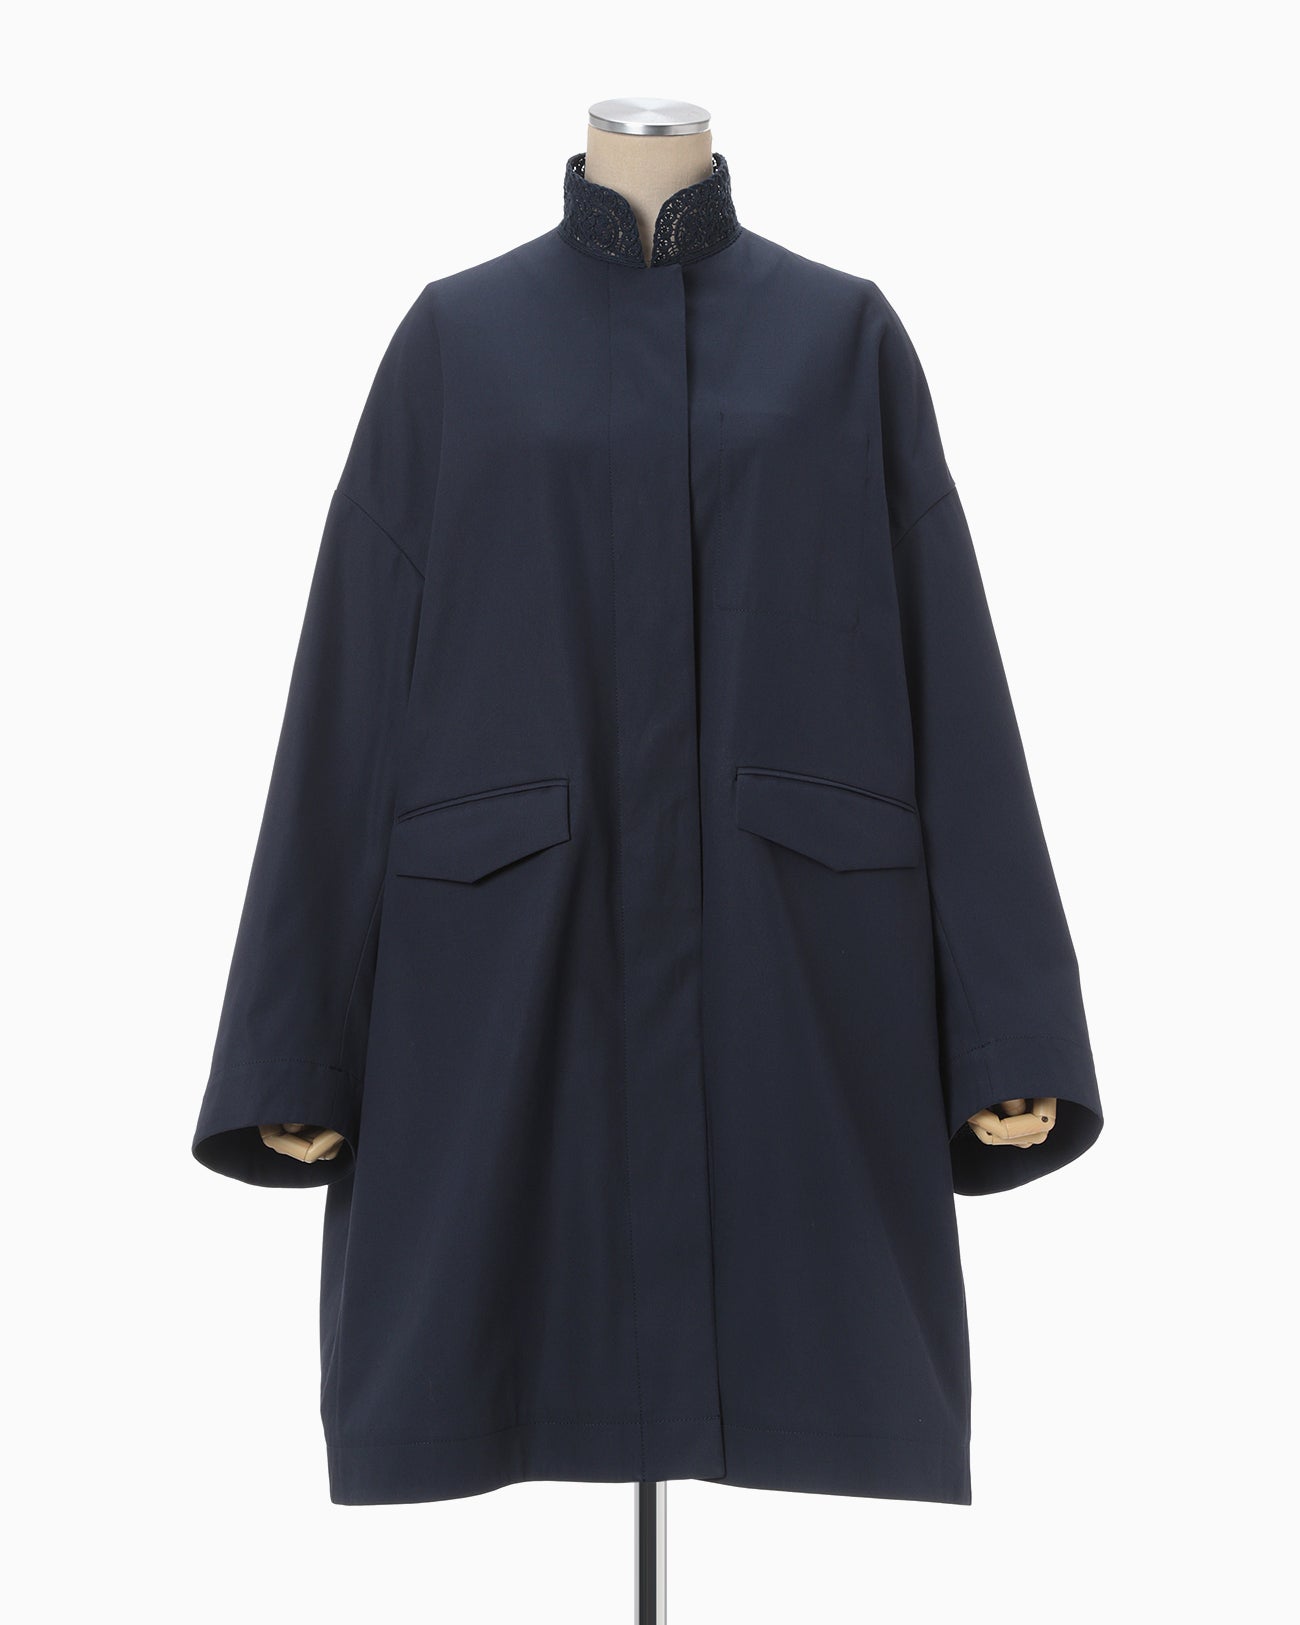 Cording Embroidery Detail Cotton Over Size Coat - navy